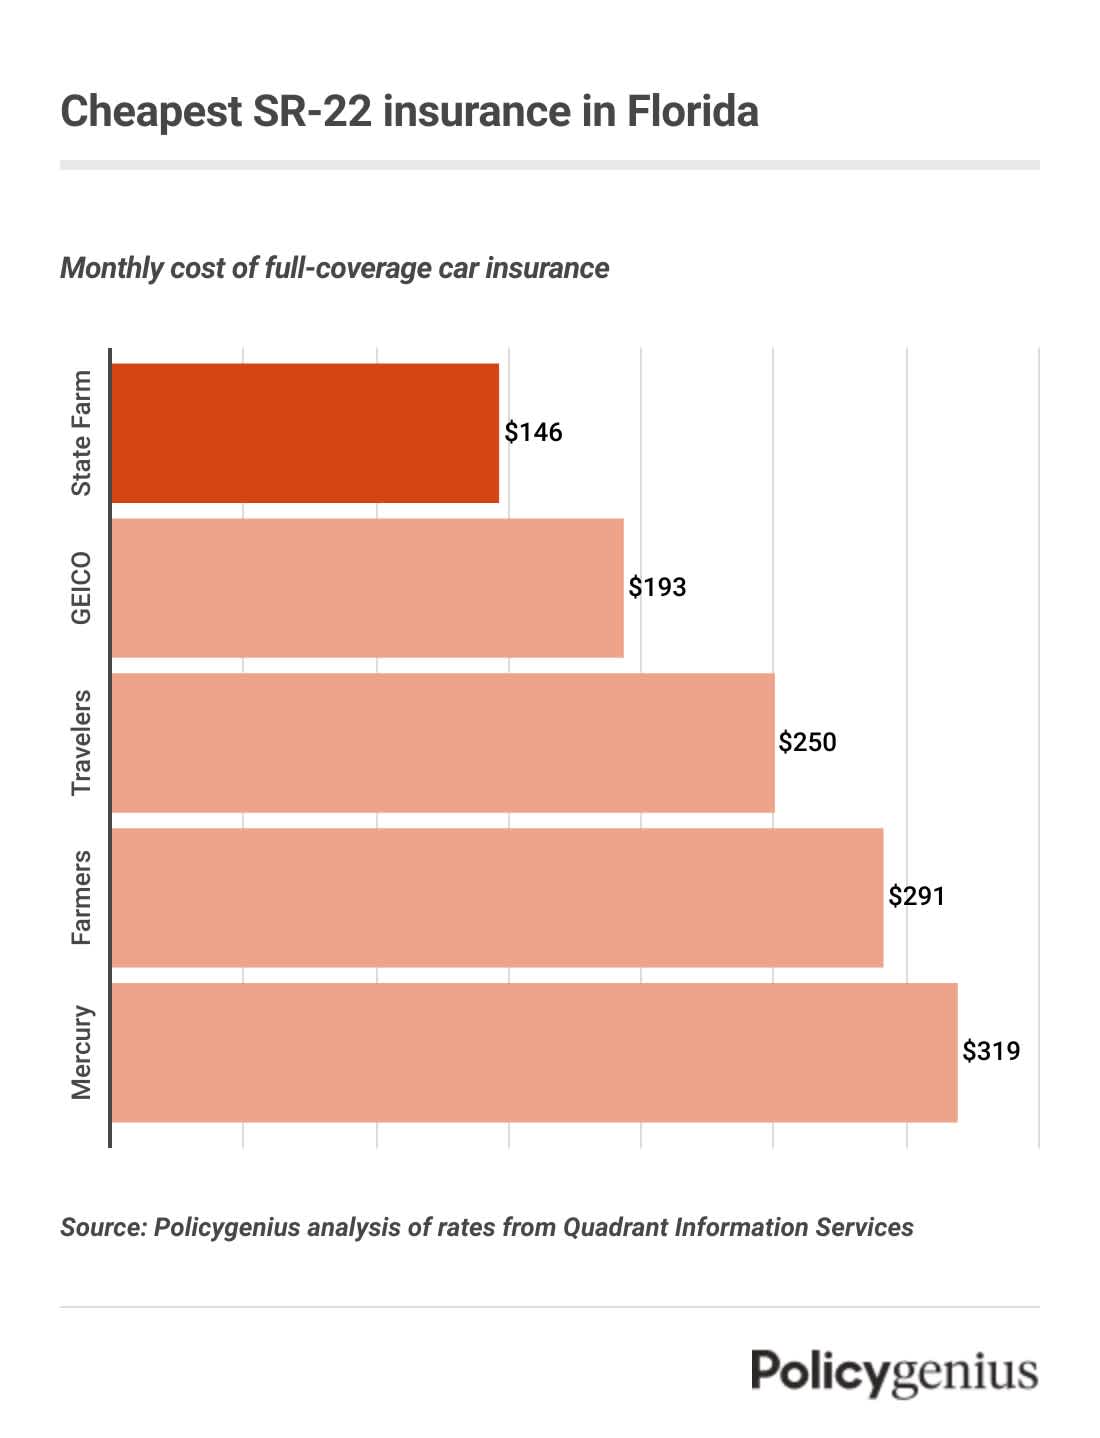 Bar graph showing the cheapest car insurance in Florida, with State Farm being the company with the lowest cost.